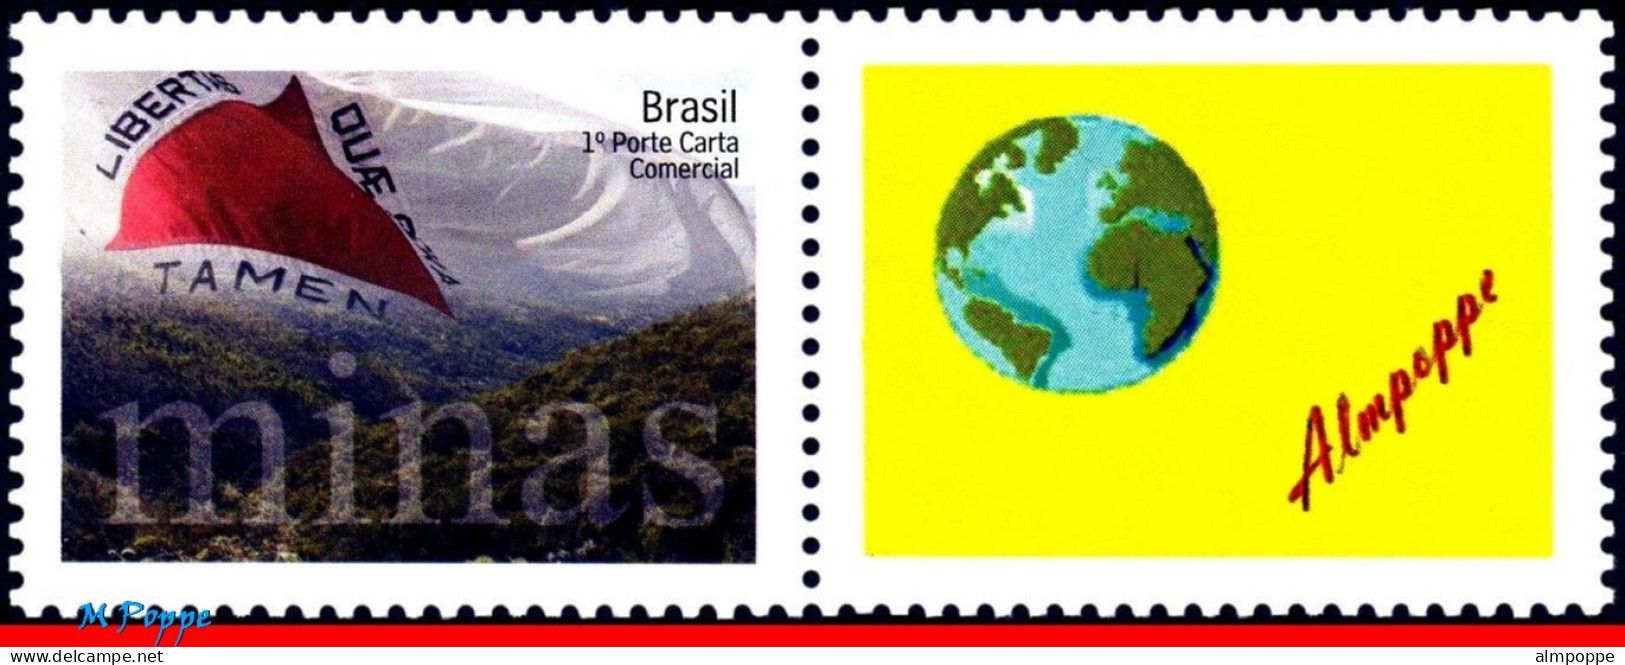 Ref. BR-3211-12-1 BRAZIL 2012 - MINAS GERAIS VE AND HO,FLAGS, WORLD, PERSONALIZED MNH, CITIES 2V Sc# 3211-12 - Personalisiert